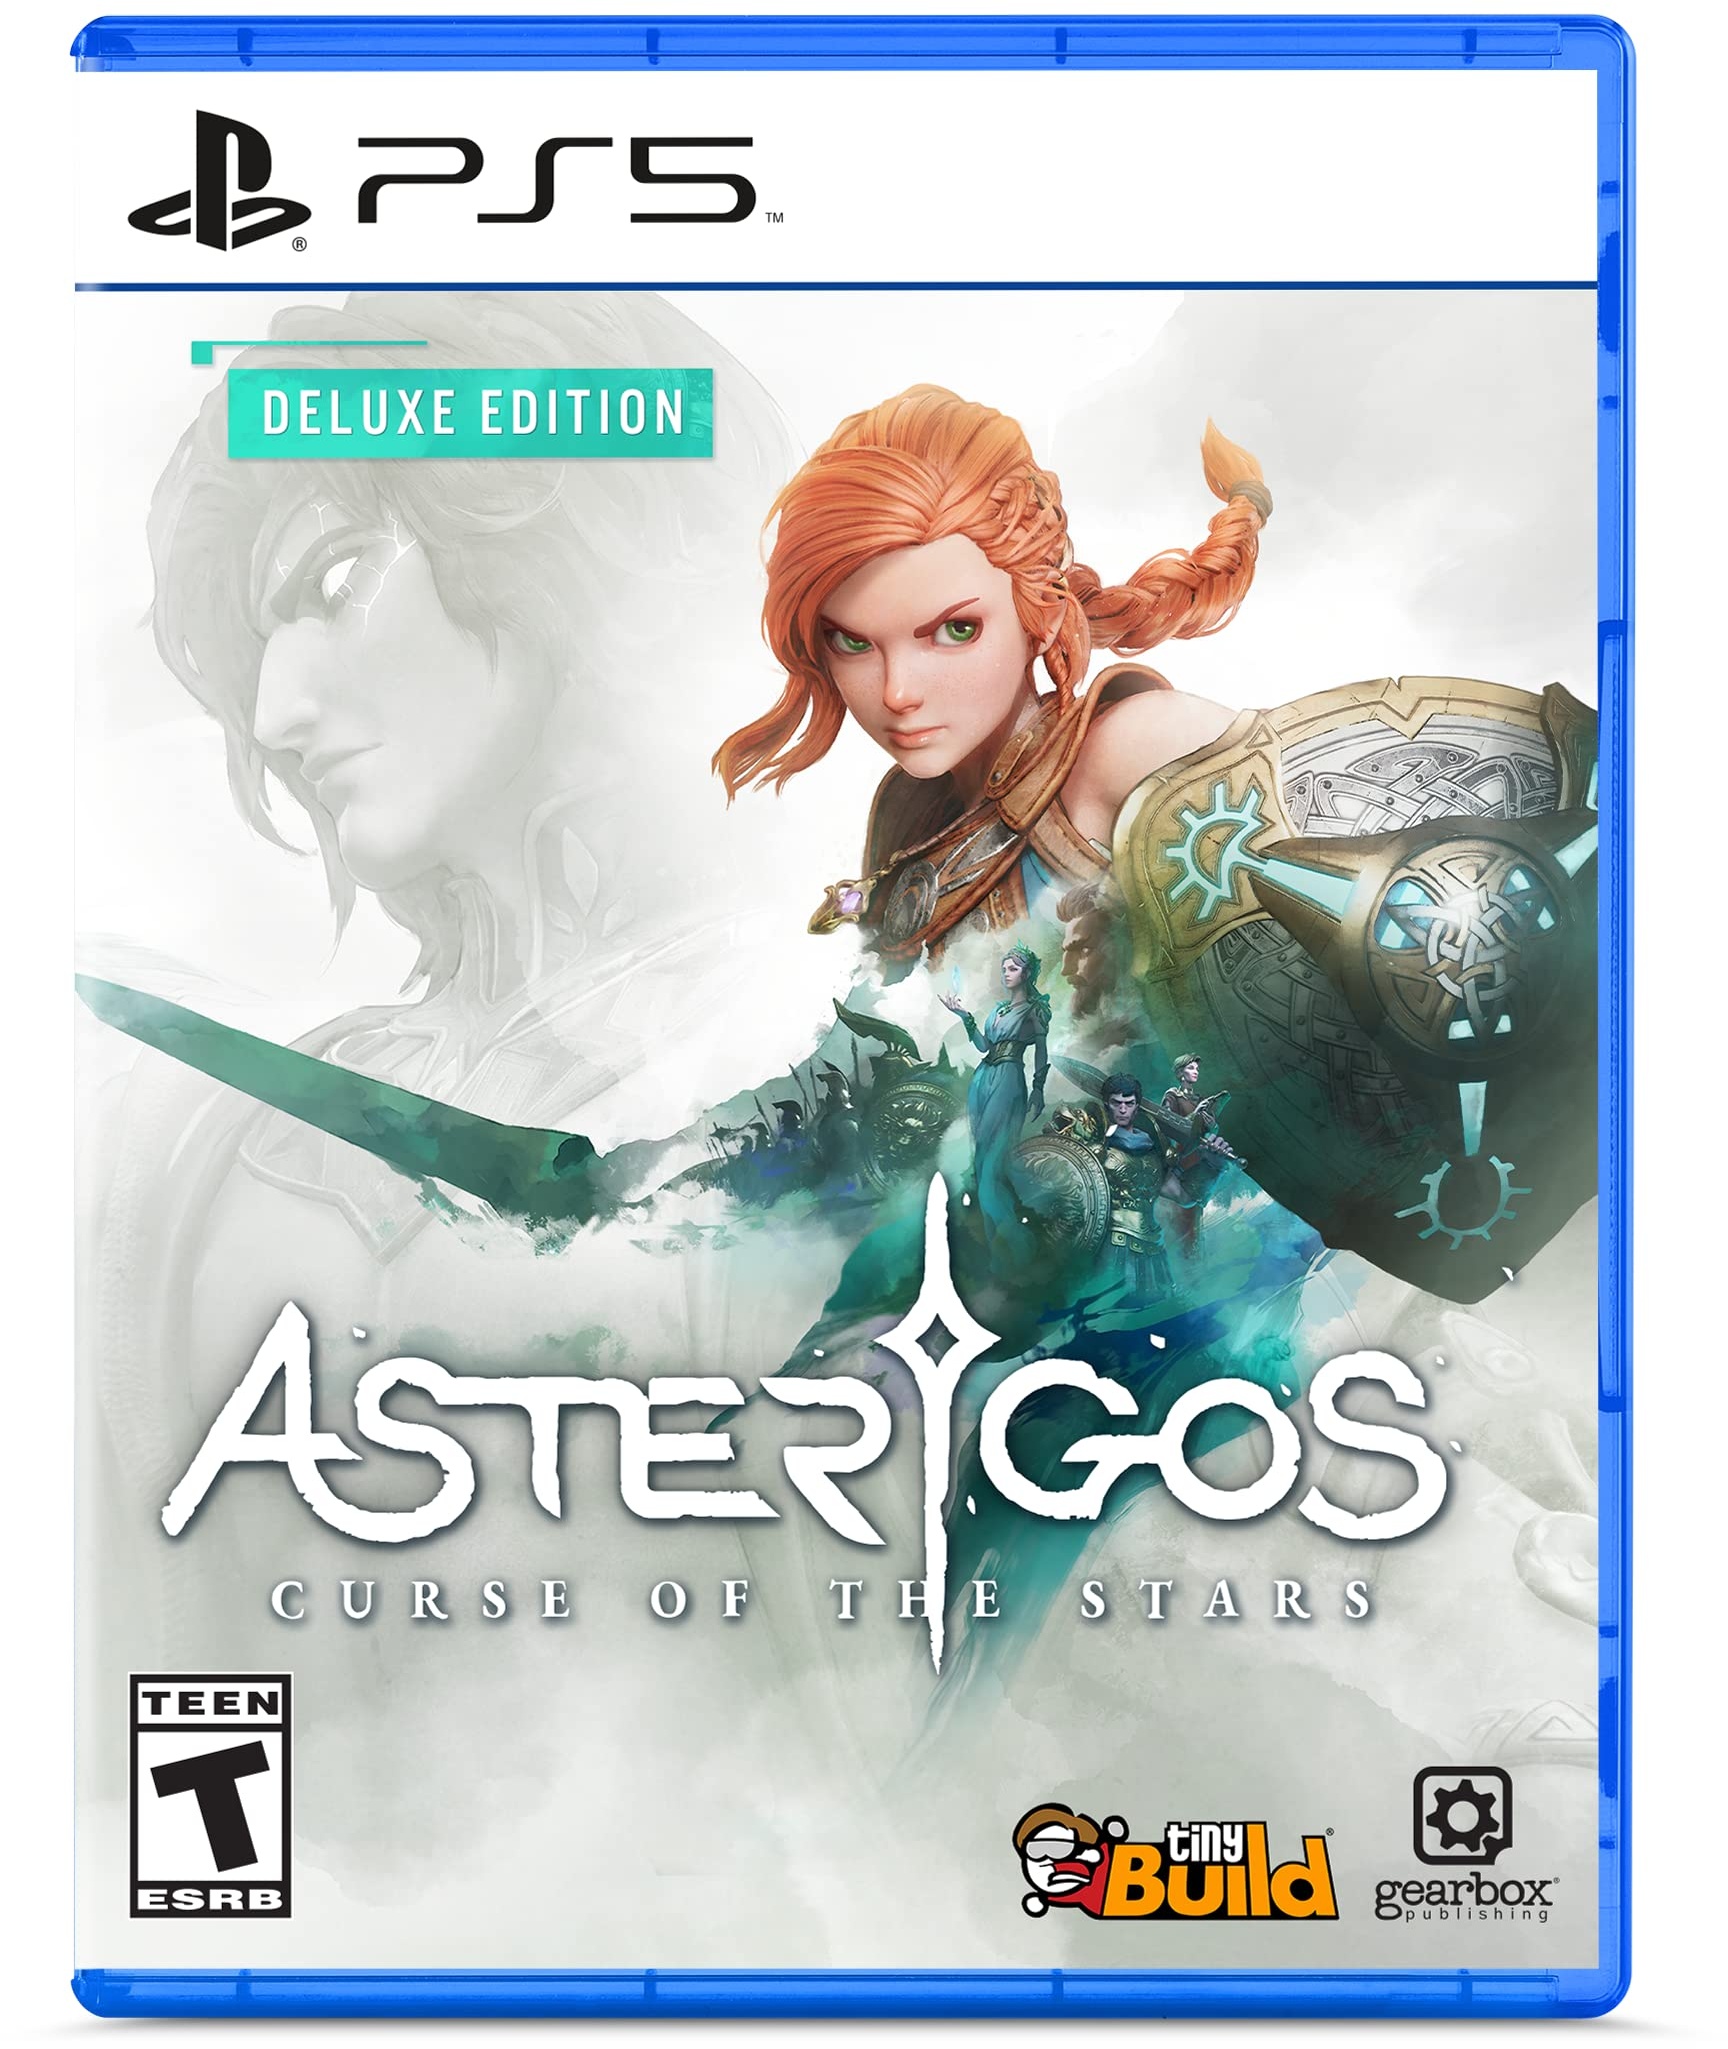 Asterigos: Curse of the Stars Deluxe Edition for PlayStation 5